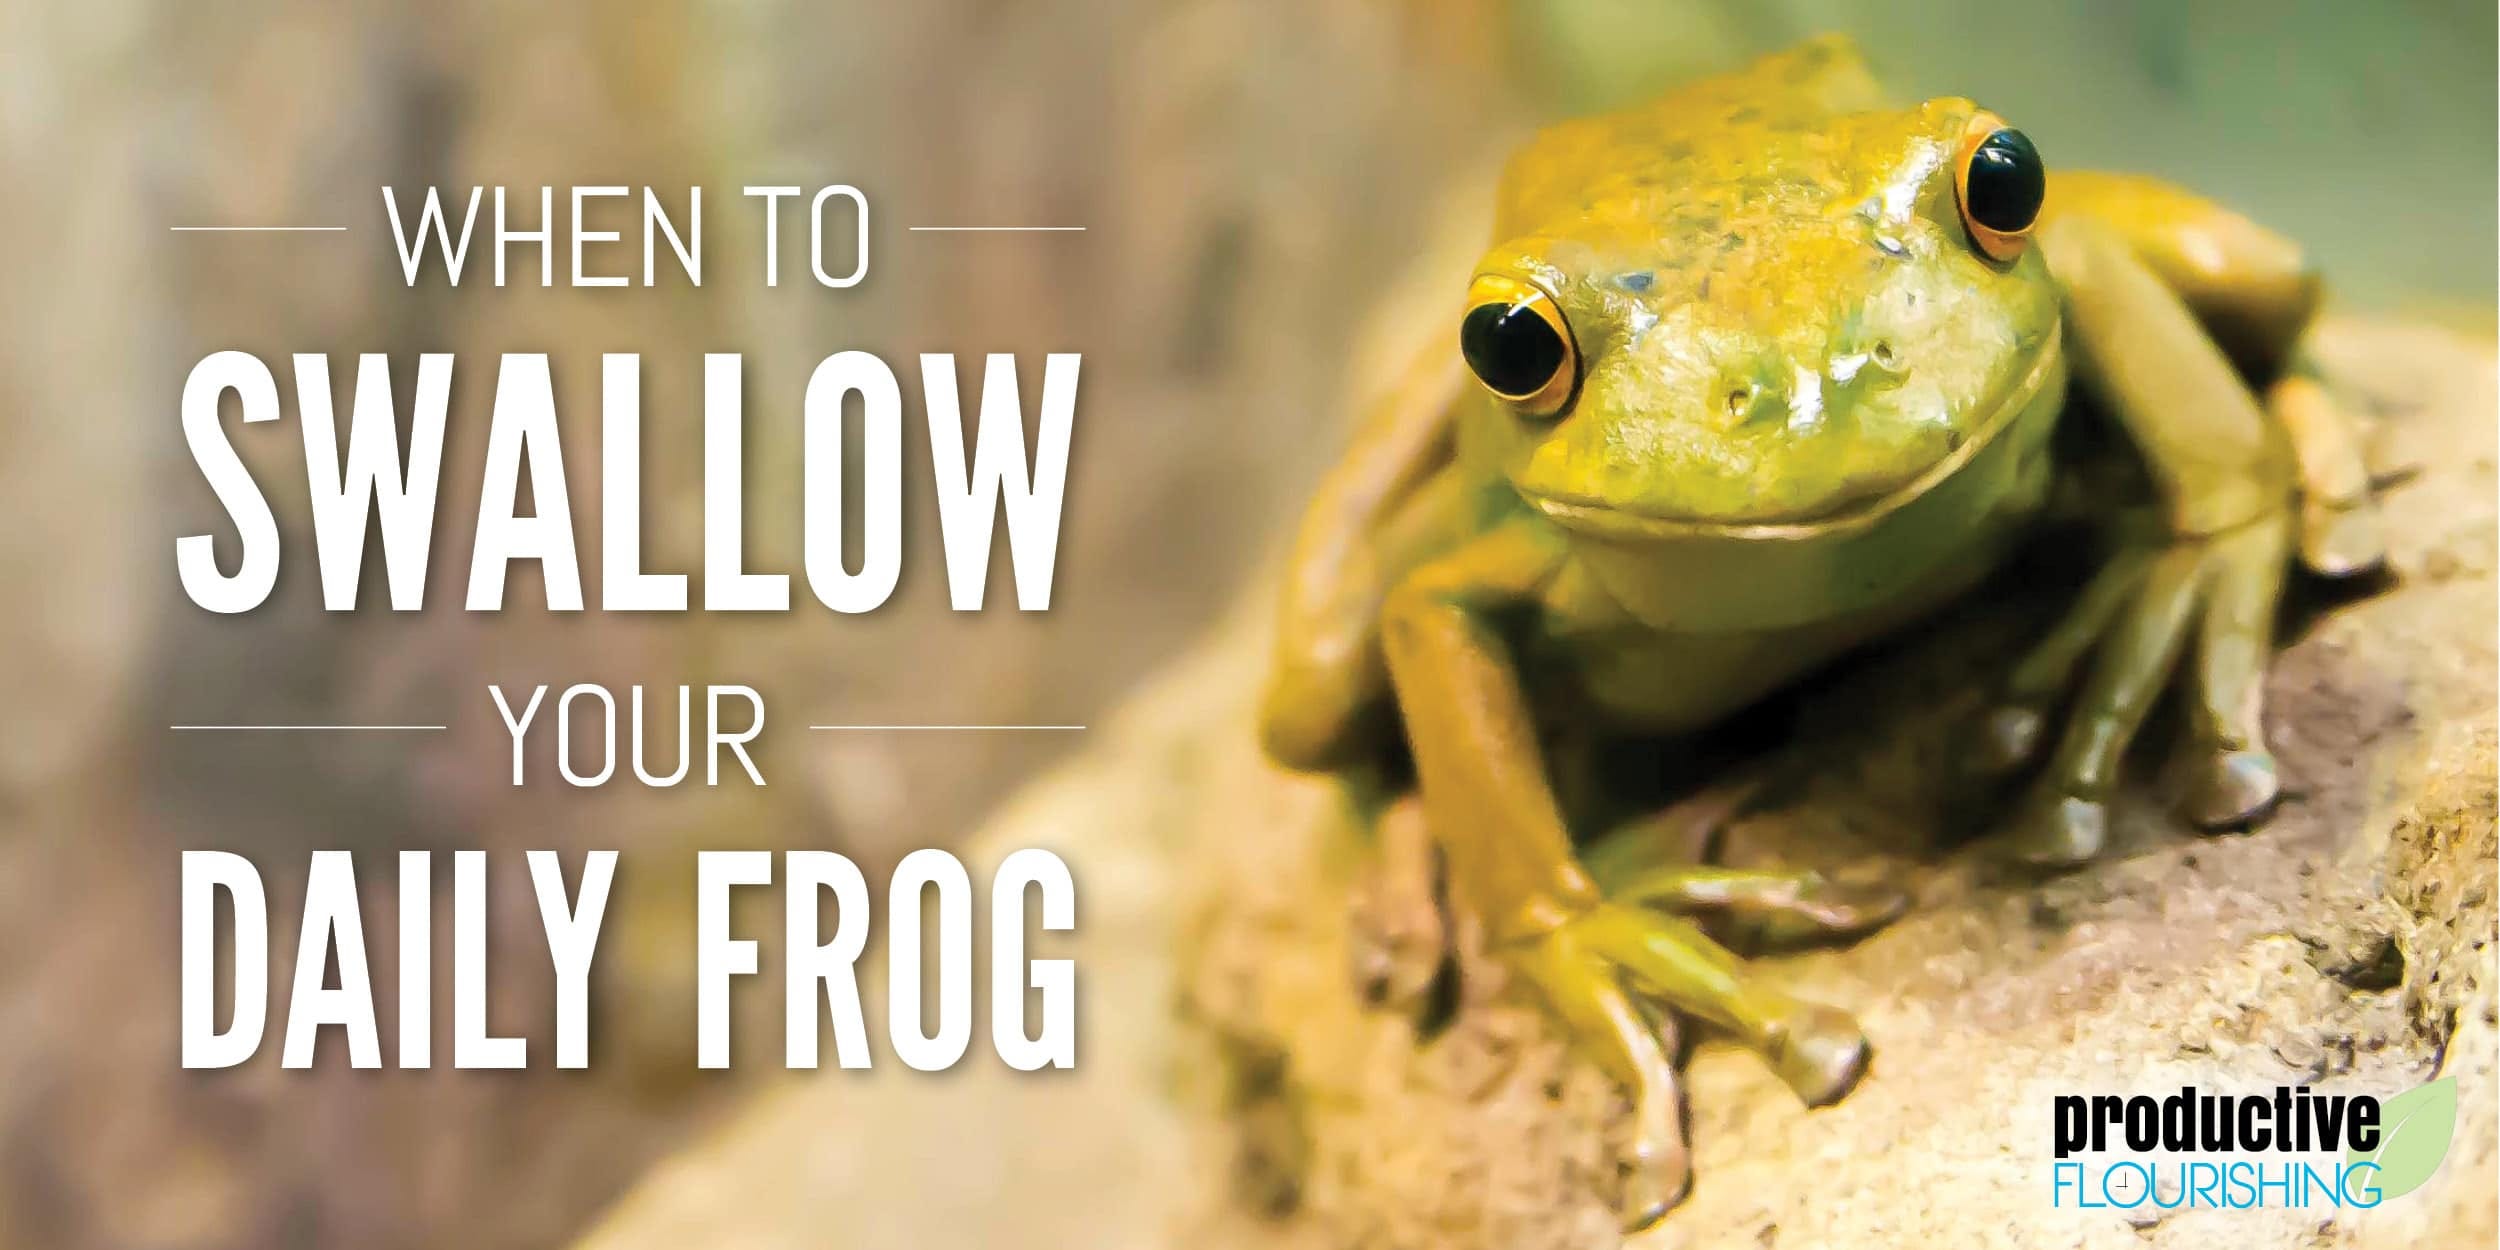 When to Swallow Your Daily Frog - by Charlie Gilkey